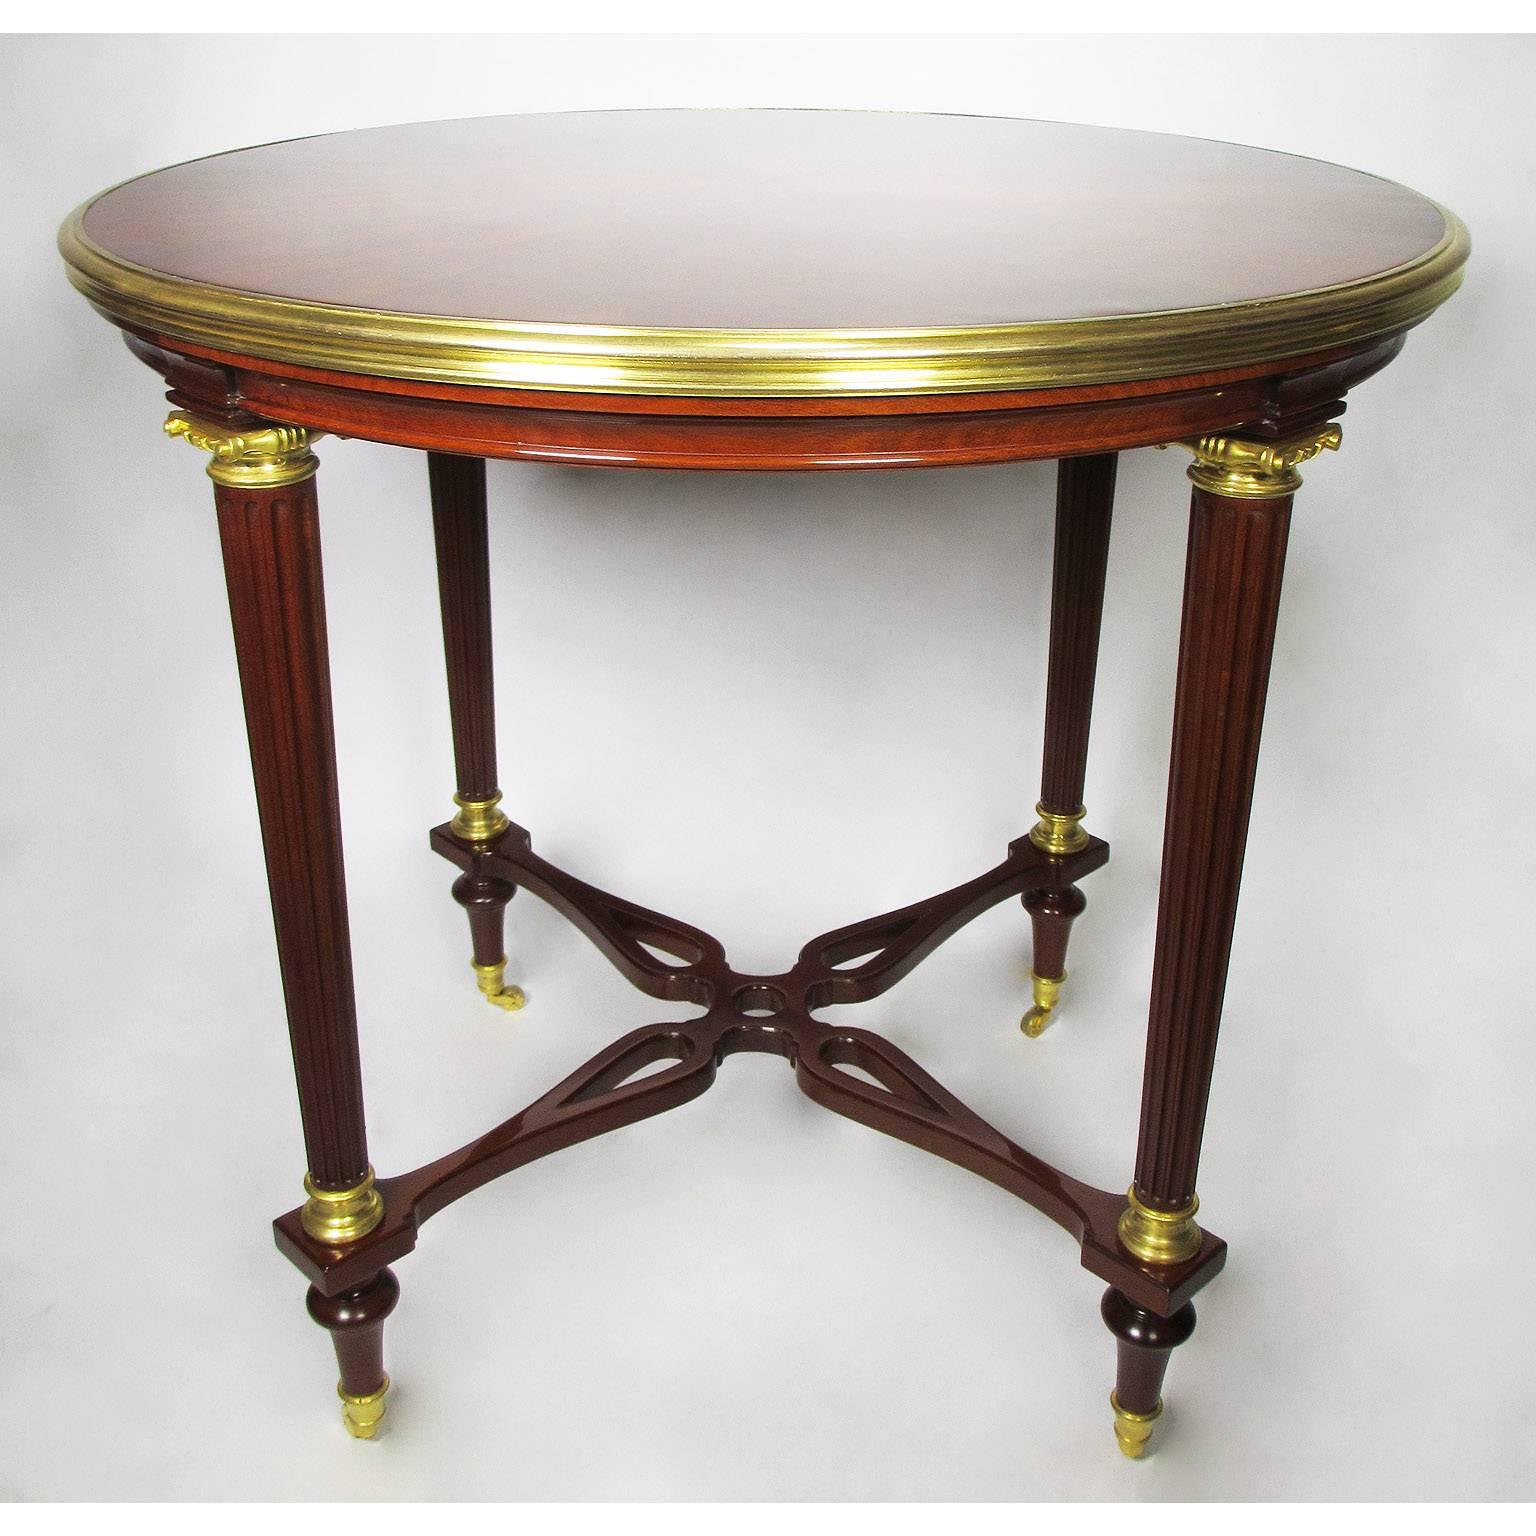 Carved French 19th-20th Century Louis XVI Style Mahogany Gueridon by Maison Jansen For Sale